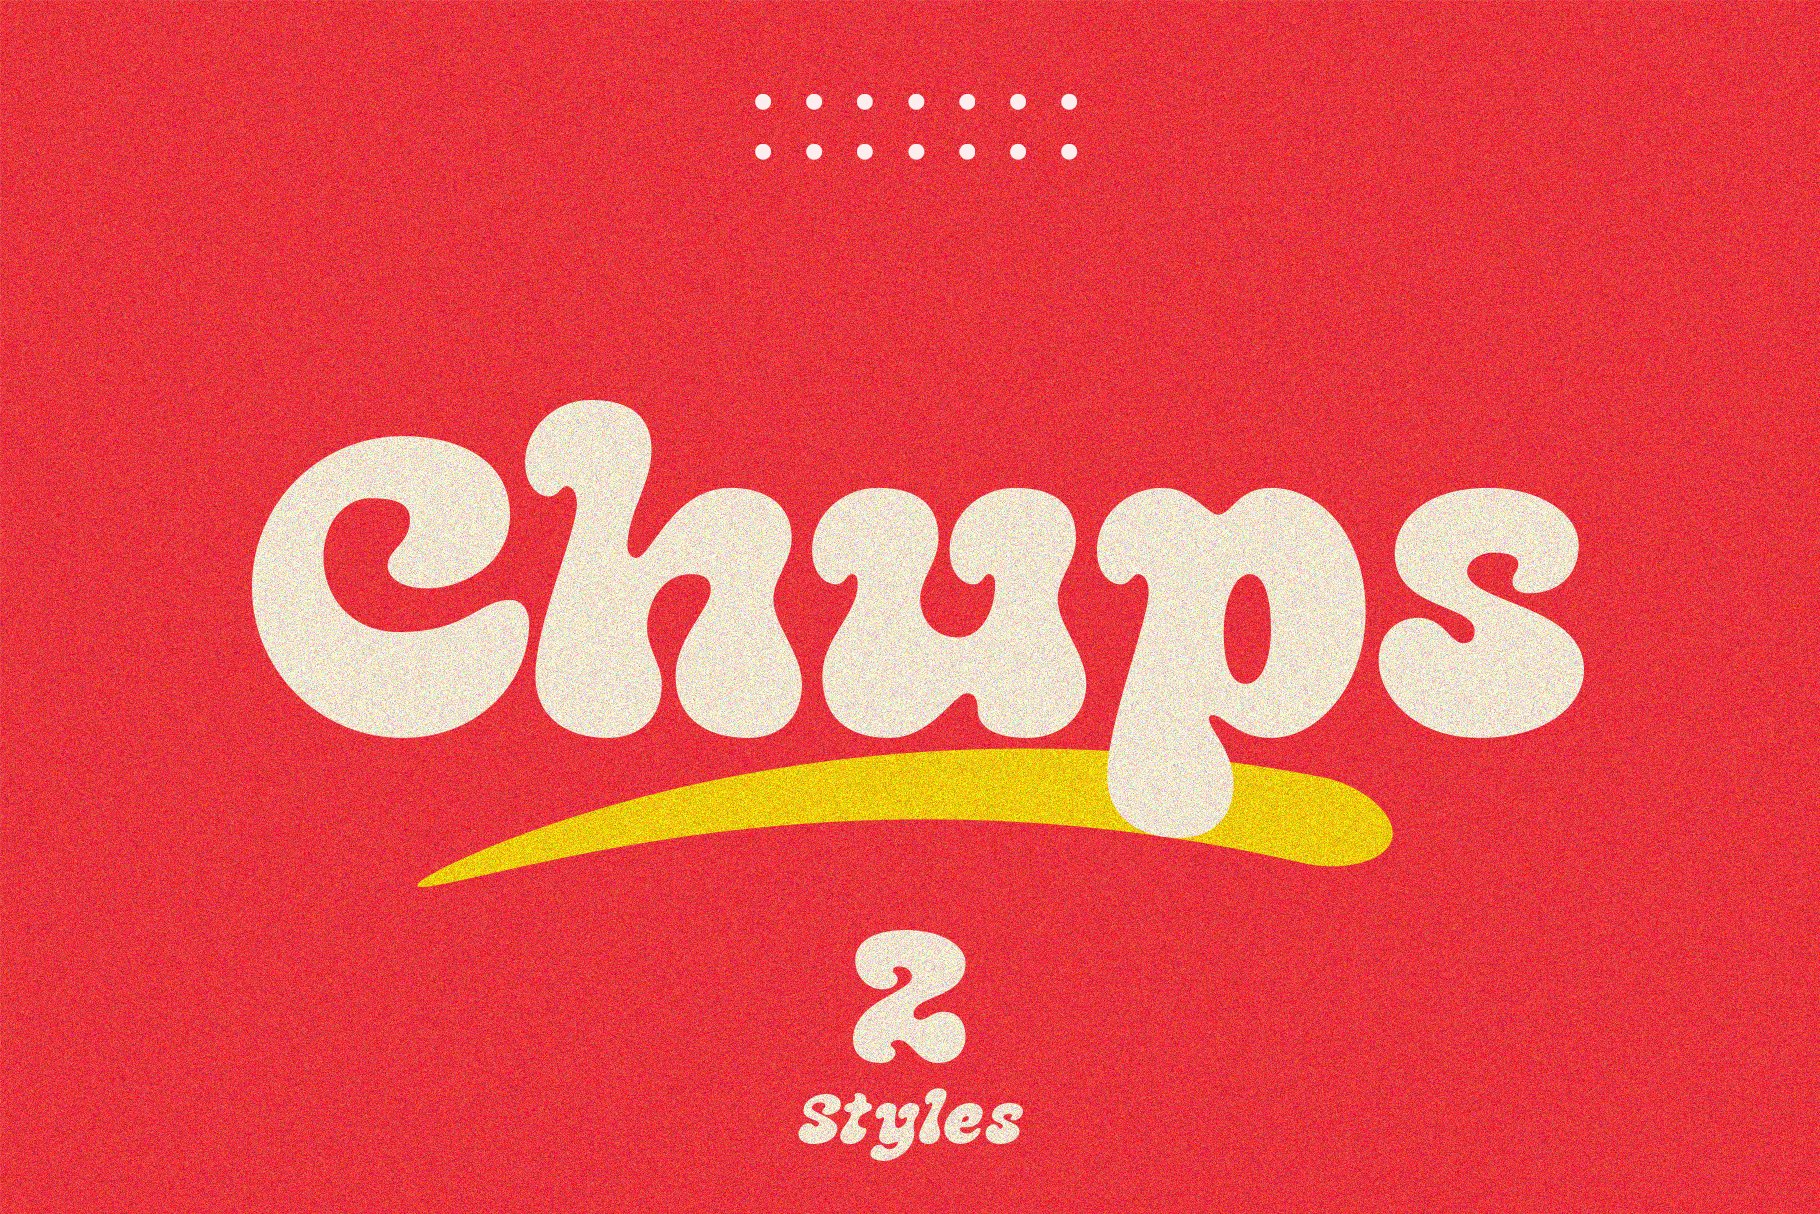 Chups - Groovy Retro Font cover image.